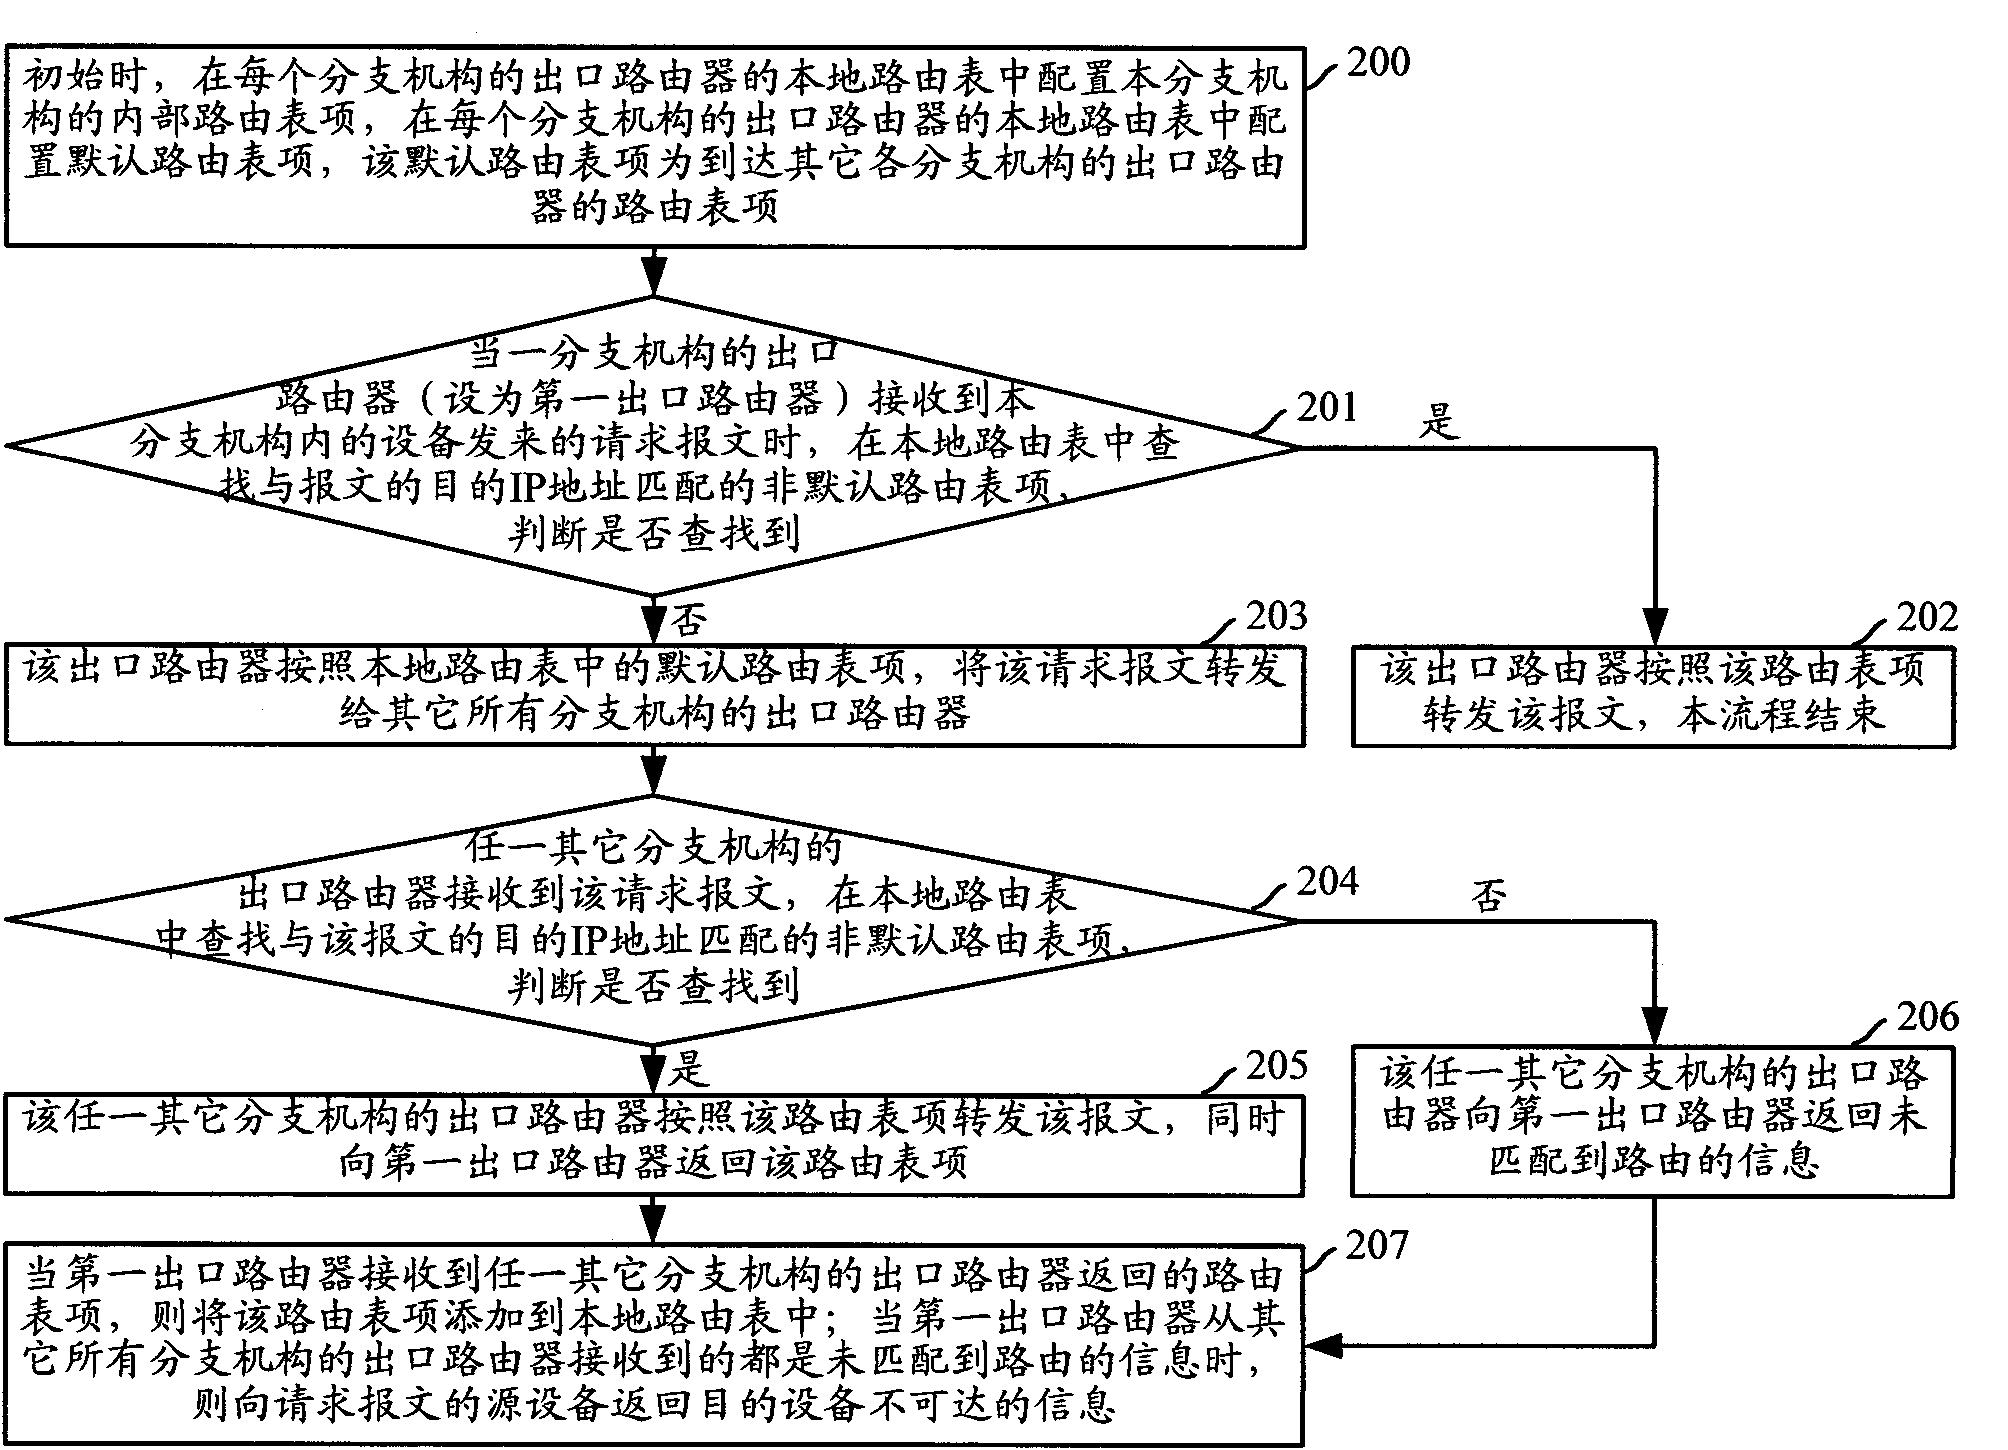 Communication method among branches and egress routers of branches